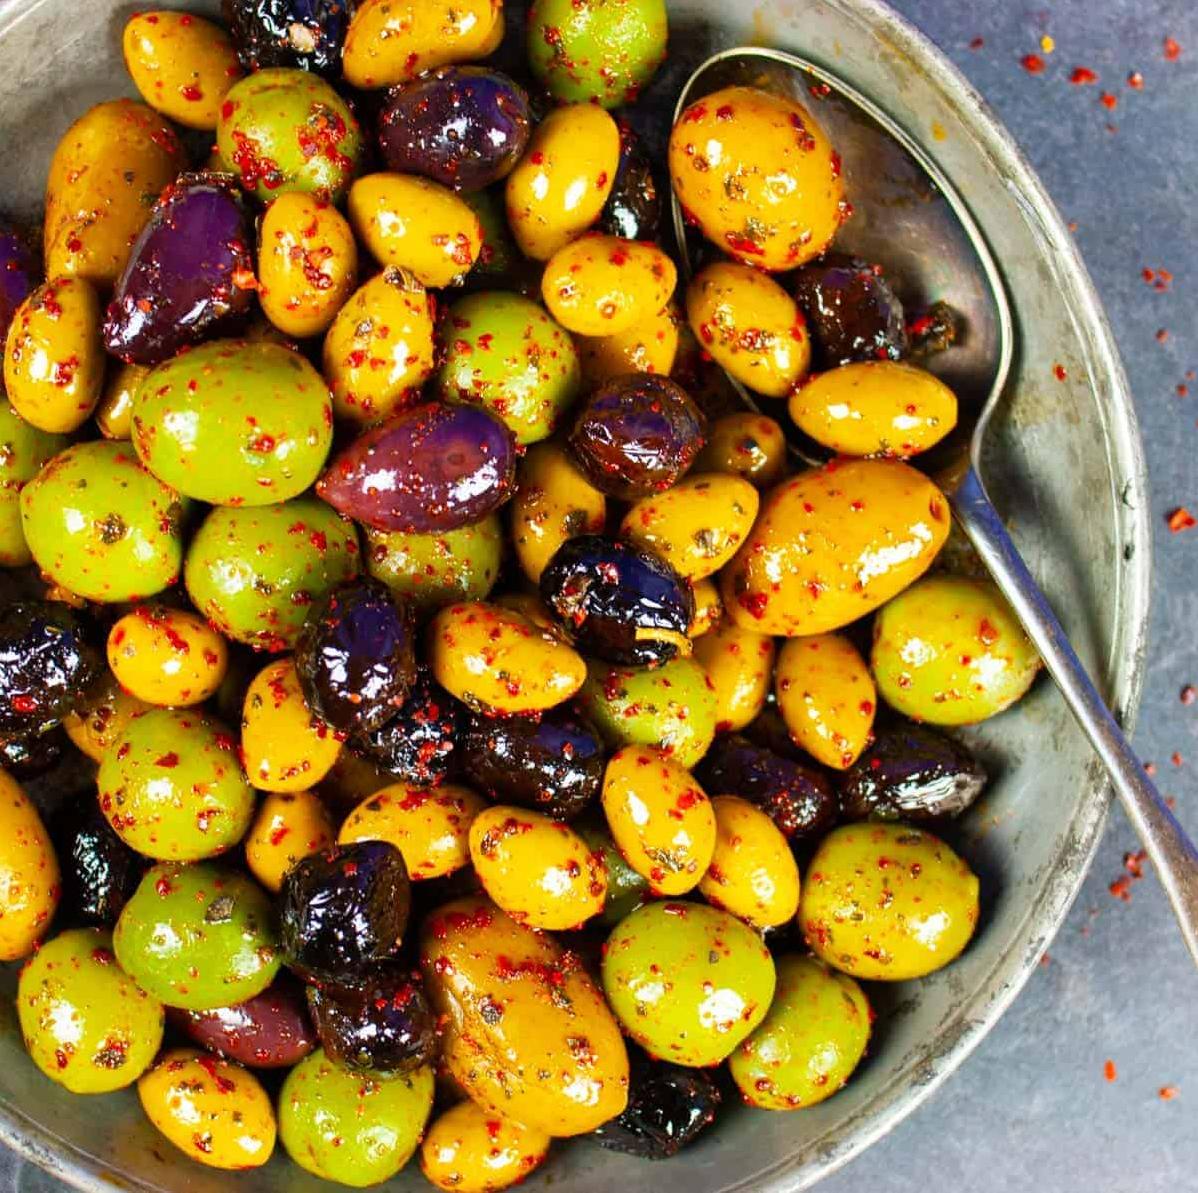  Perfect for a party or game day, these olives will be a crowd-pleaser